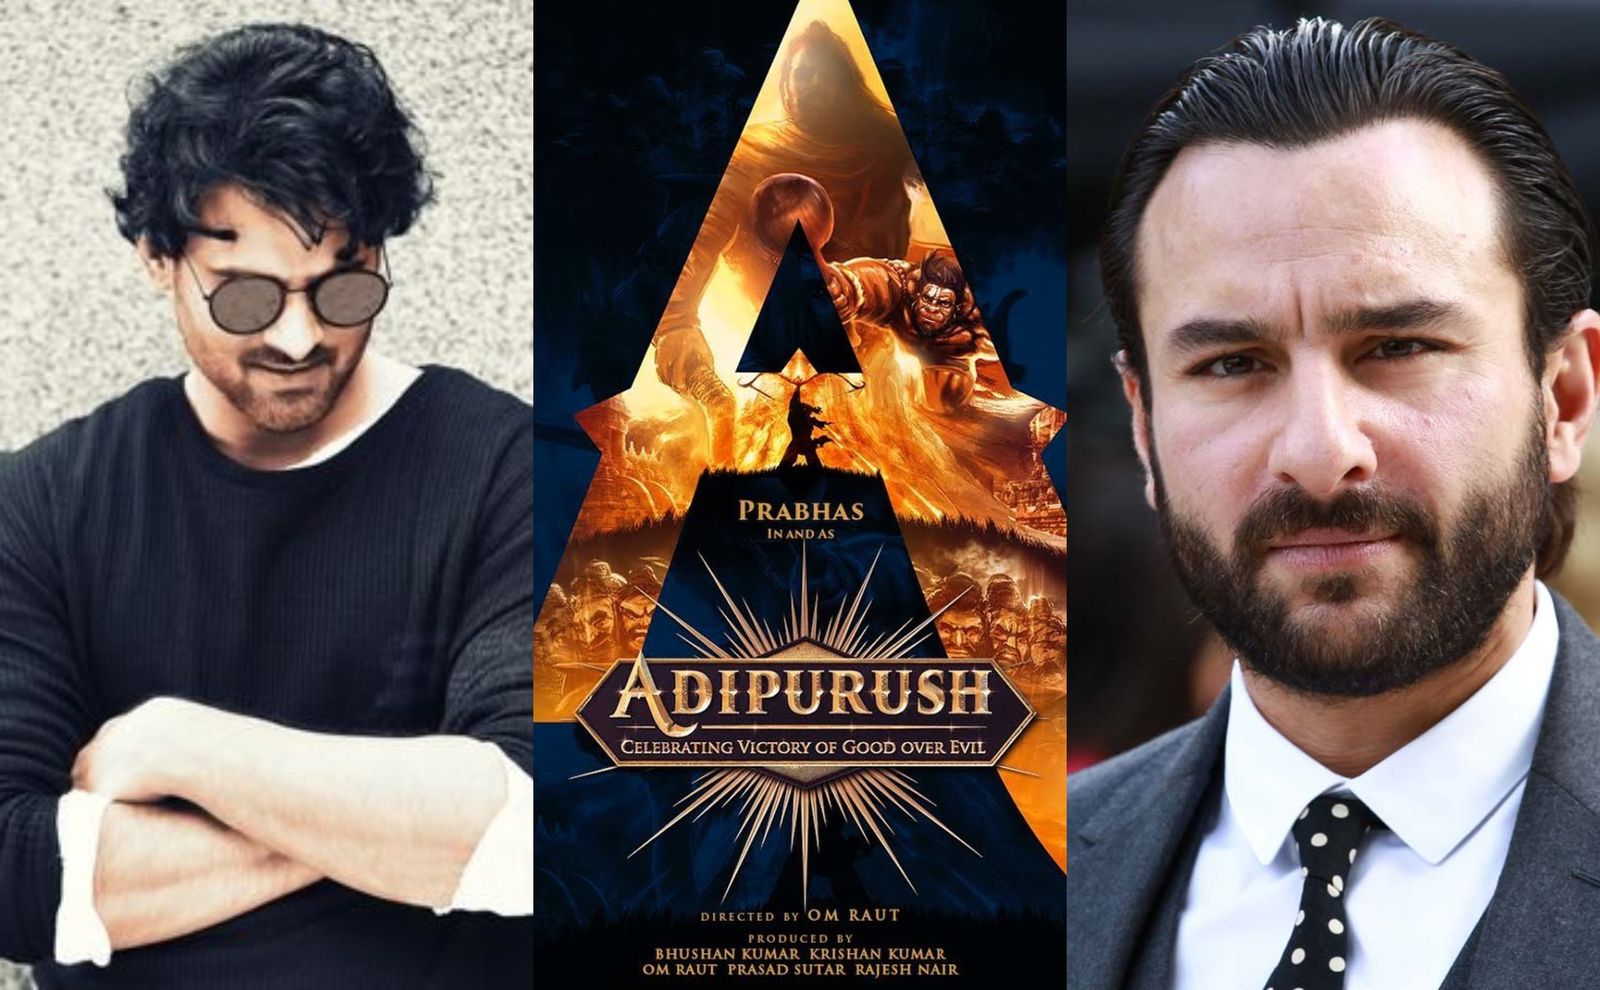 Saif Ali Khan Likely To Get Into The Villainous Mode Again For Adipurush, To Go Head To Head With Prabhas